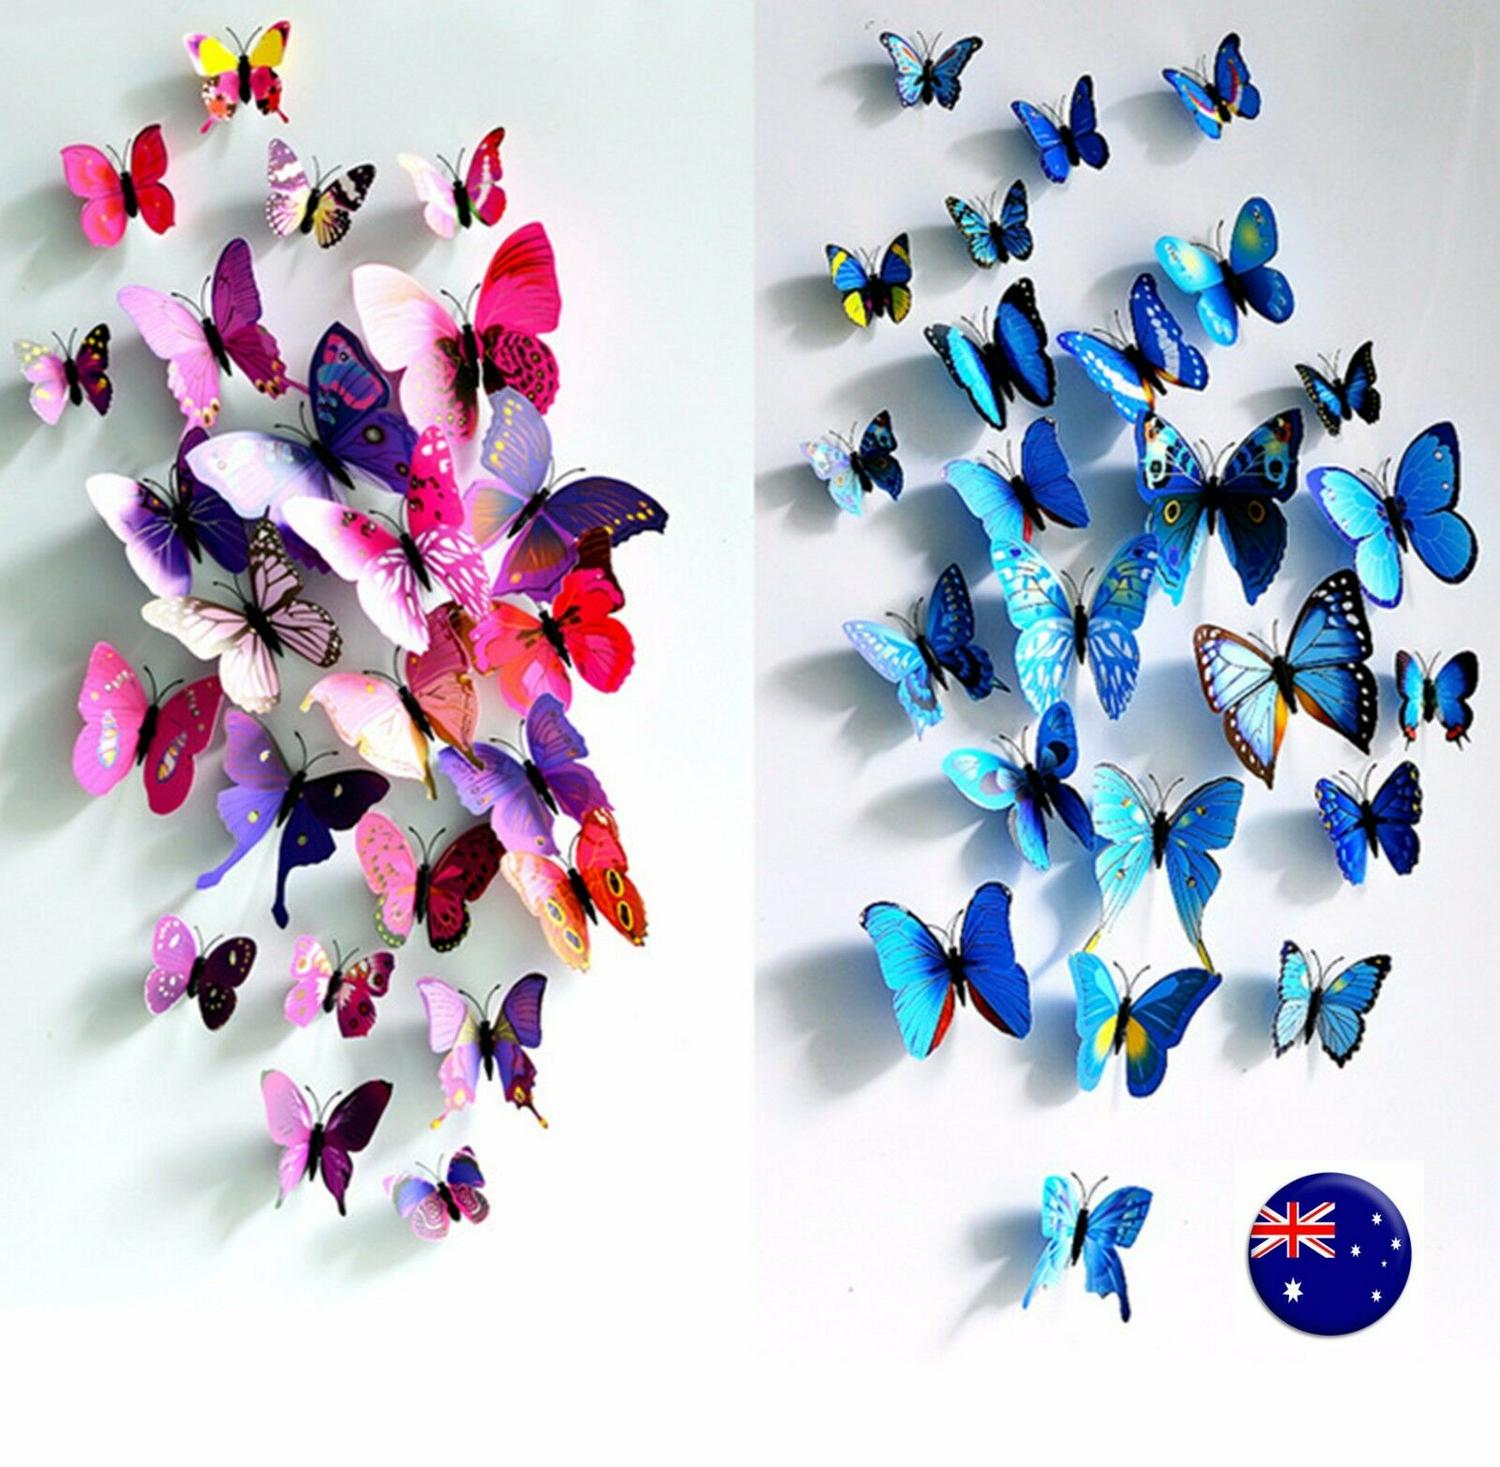 12PC Christmas Wedding Pink / Blue Butterfly Party Wall Sticker Home Decorations